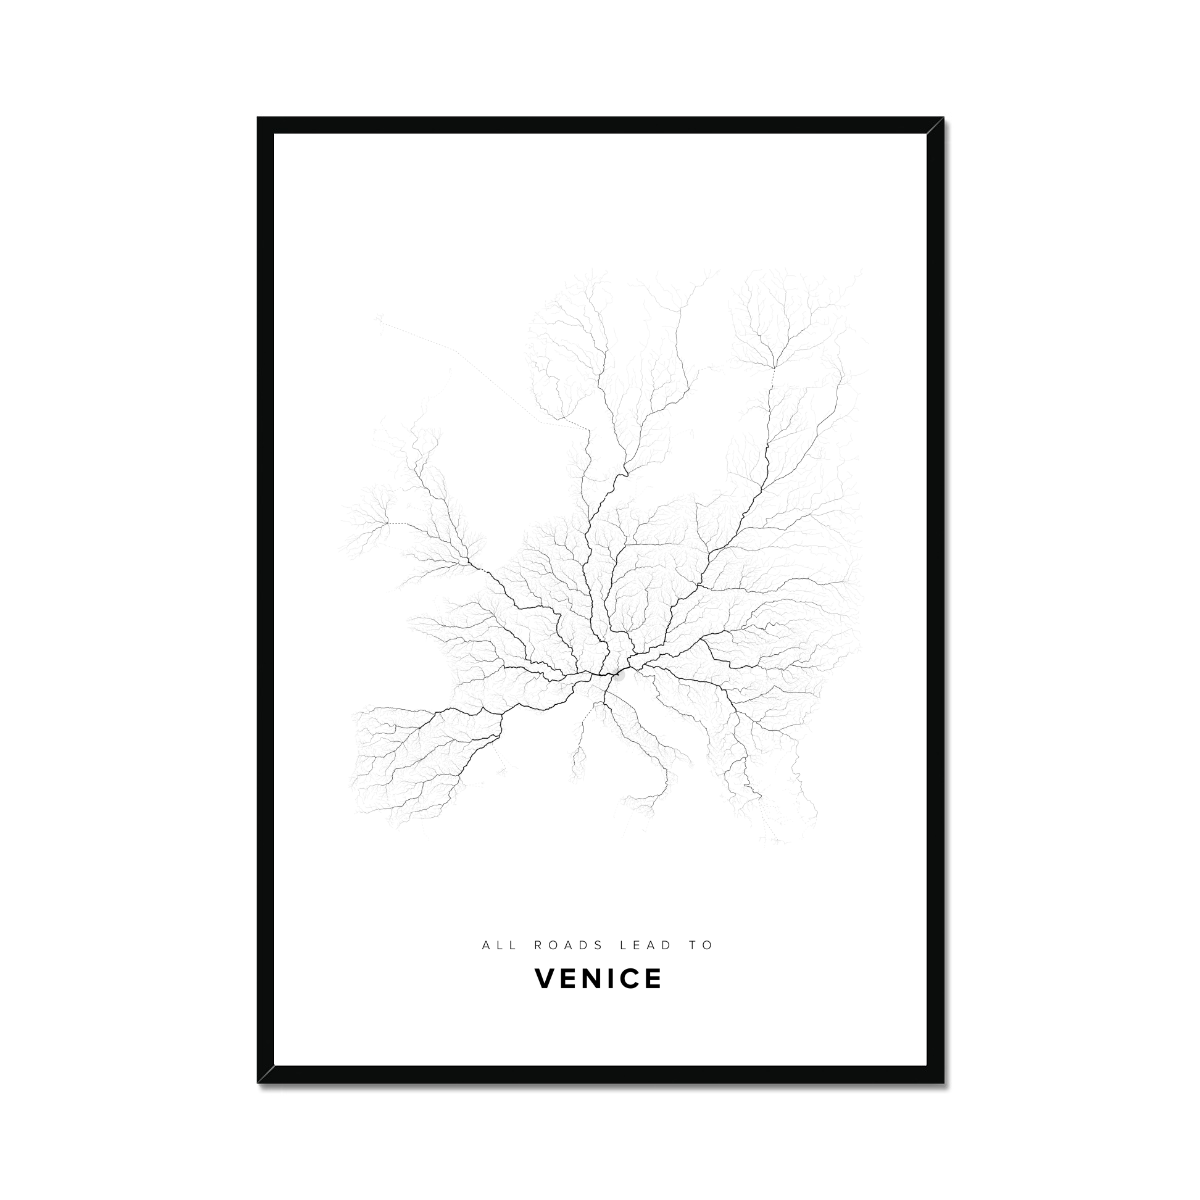 All roads lead to Venice (Italy) Fine Art Map Print